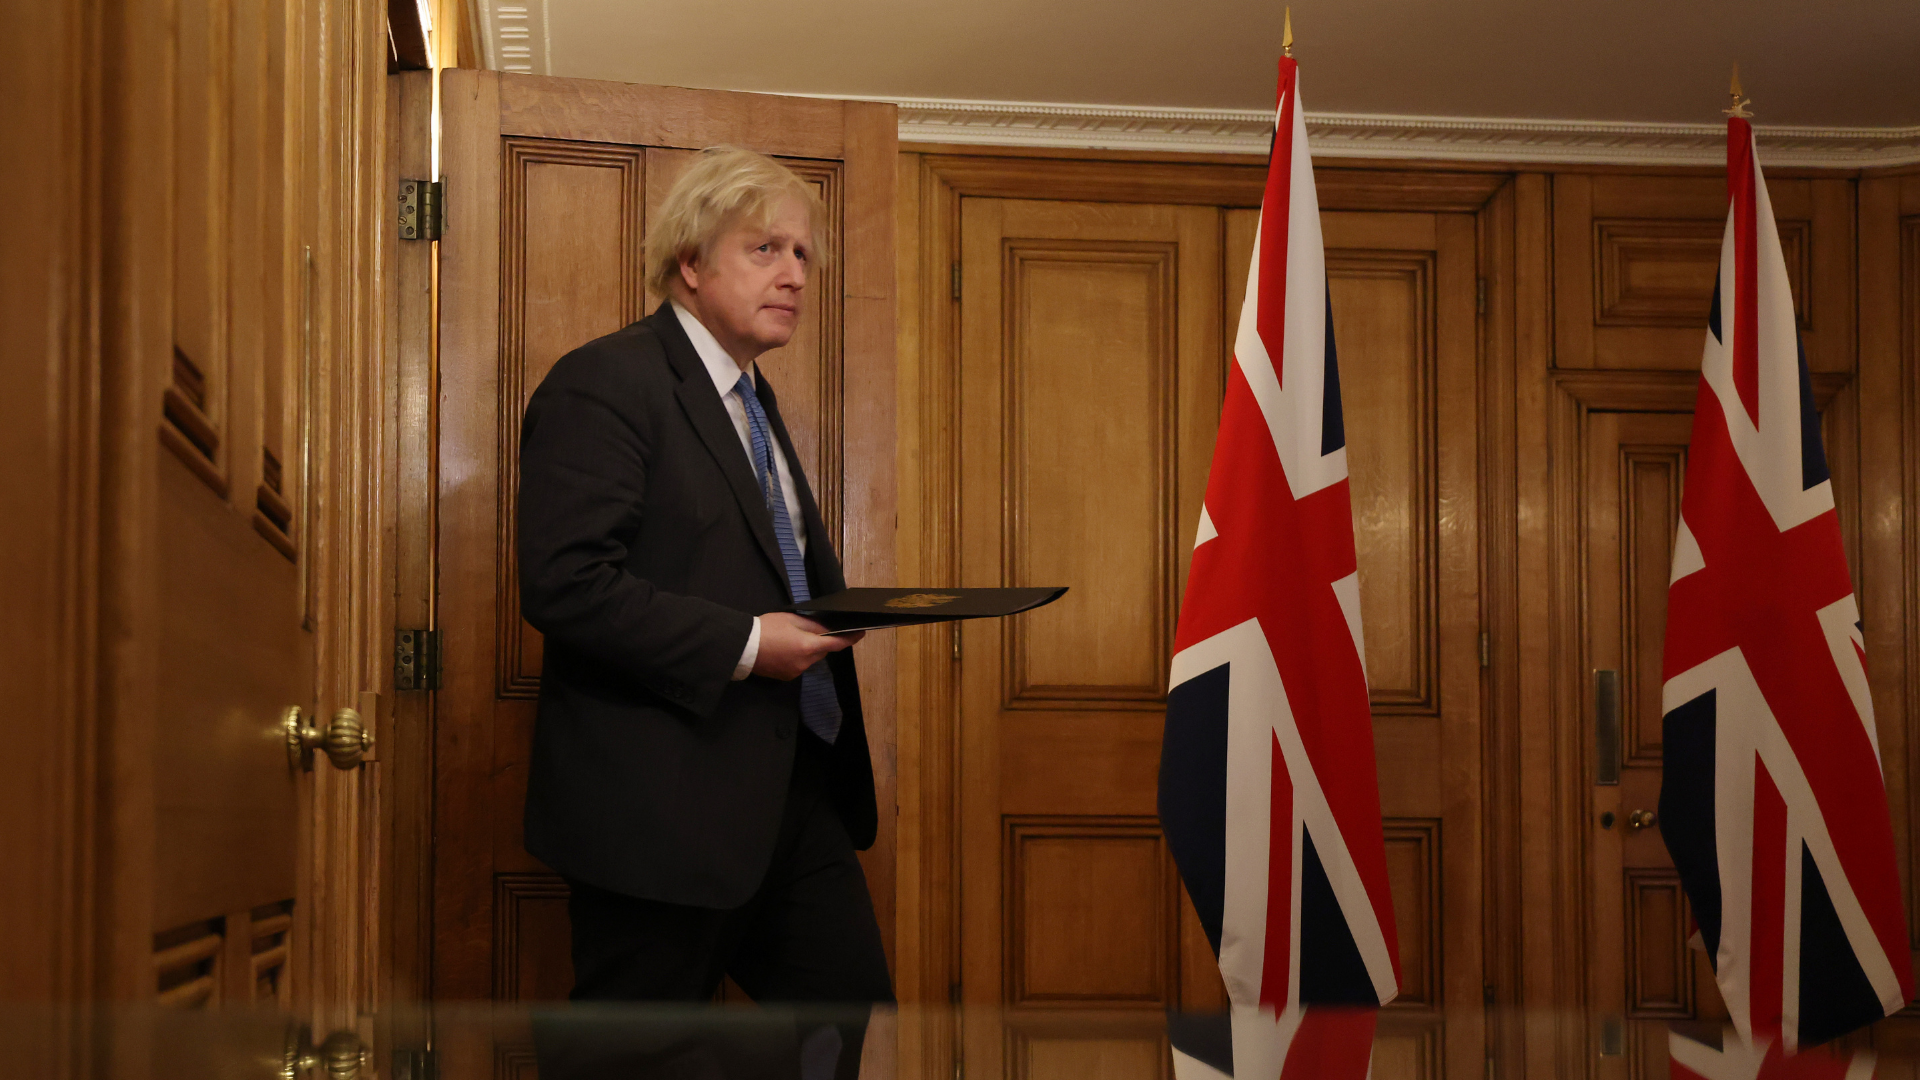 Prime Minister Boris Johnson has been warned of mass job losses as he sets out a "roadmap" for easing lockdown. Image credit: Number 10 / Flickr